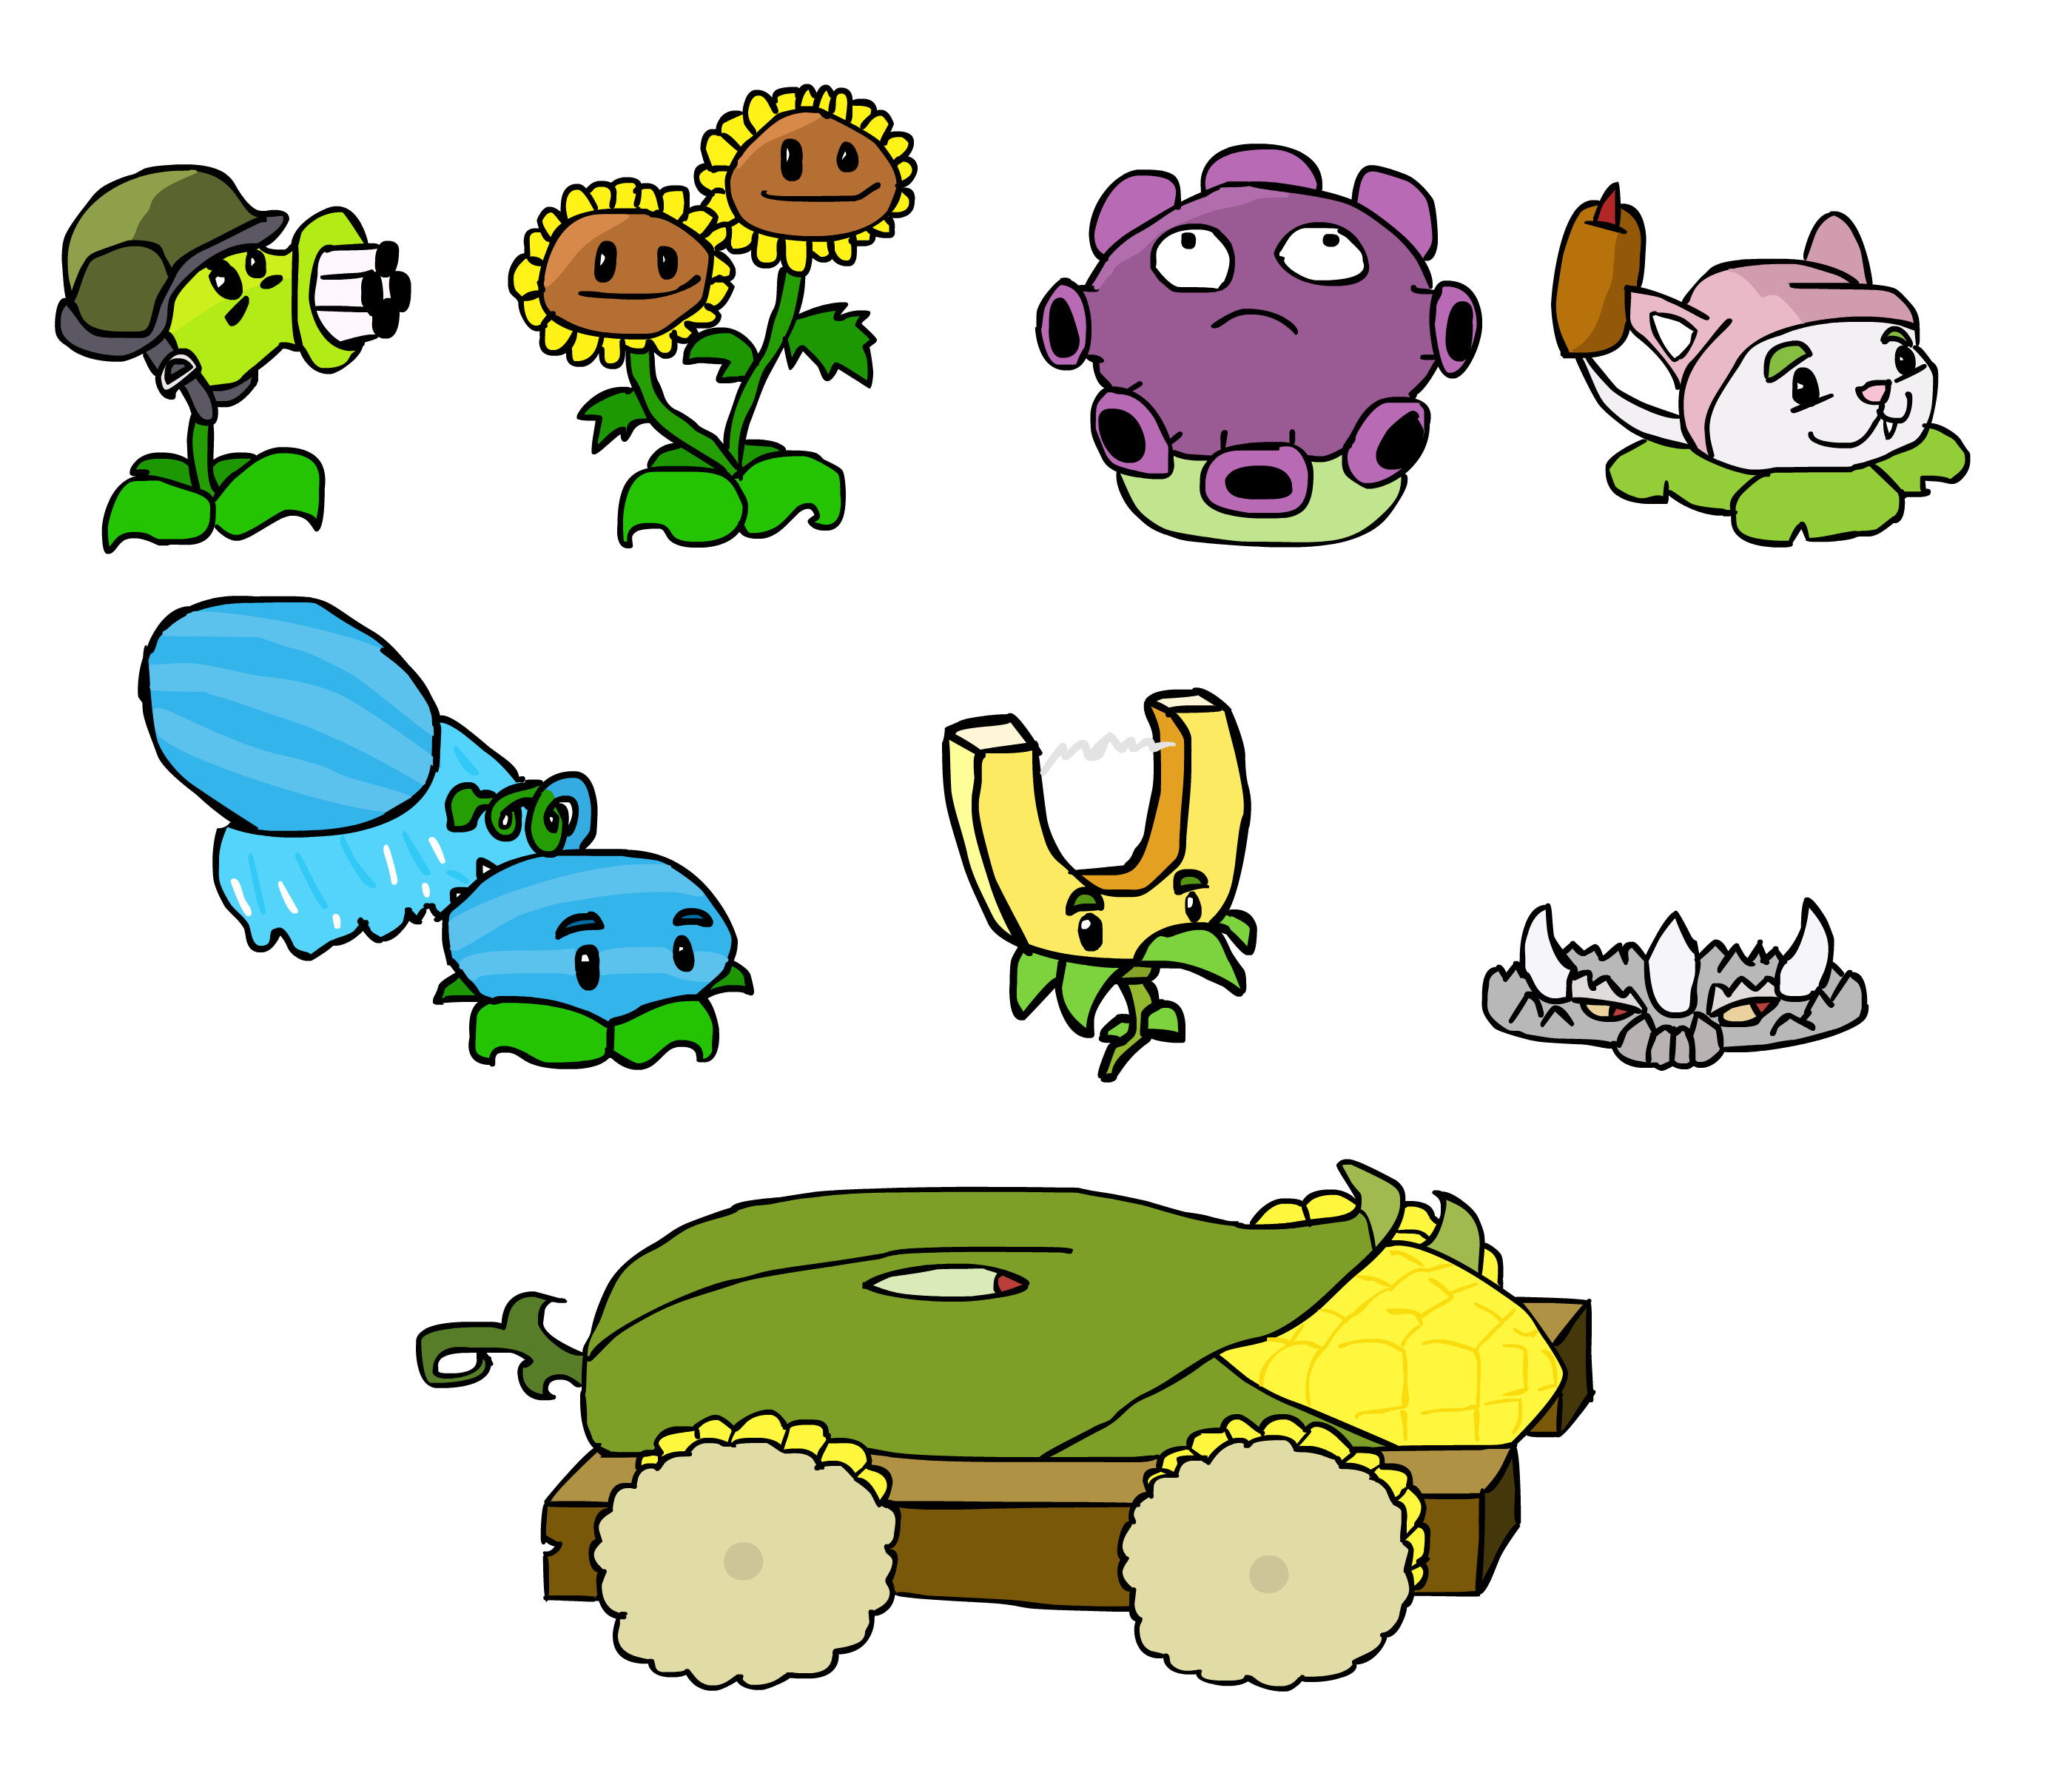 plants zombies 2 characters